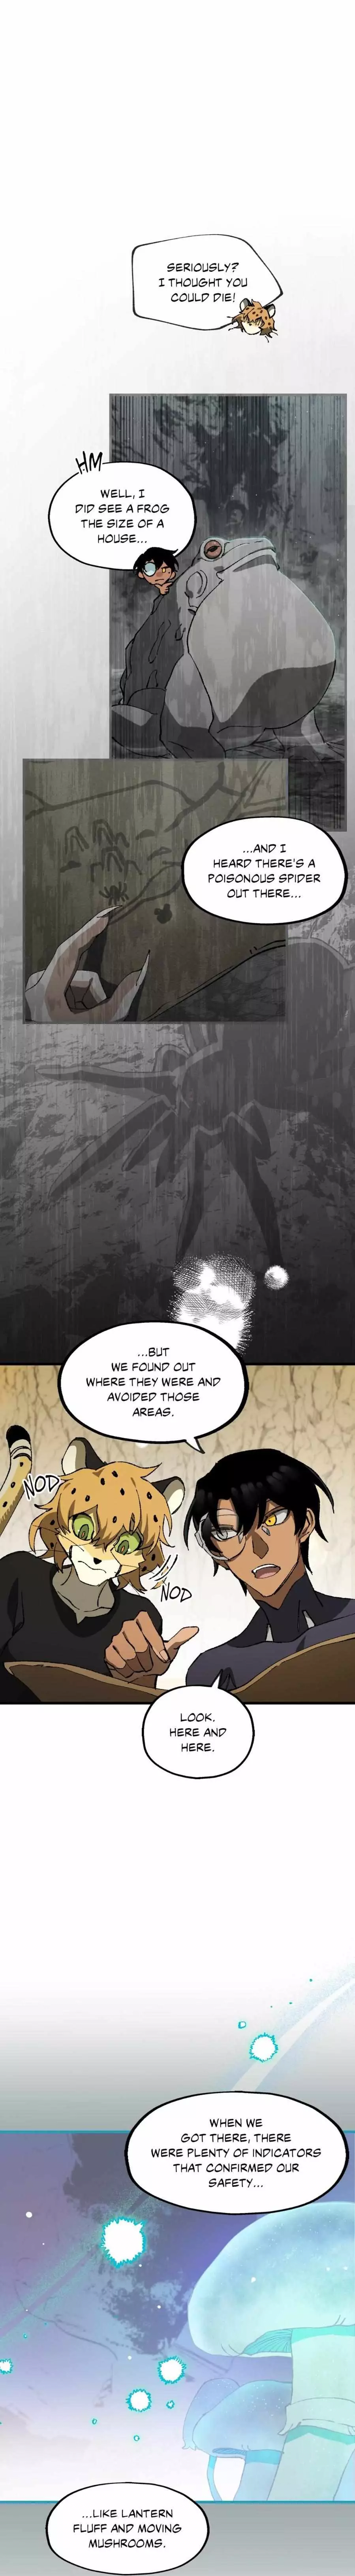 Hungry Souls - 14 page 16-88921c38